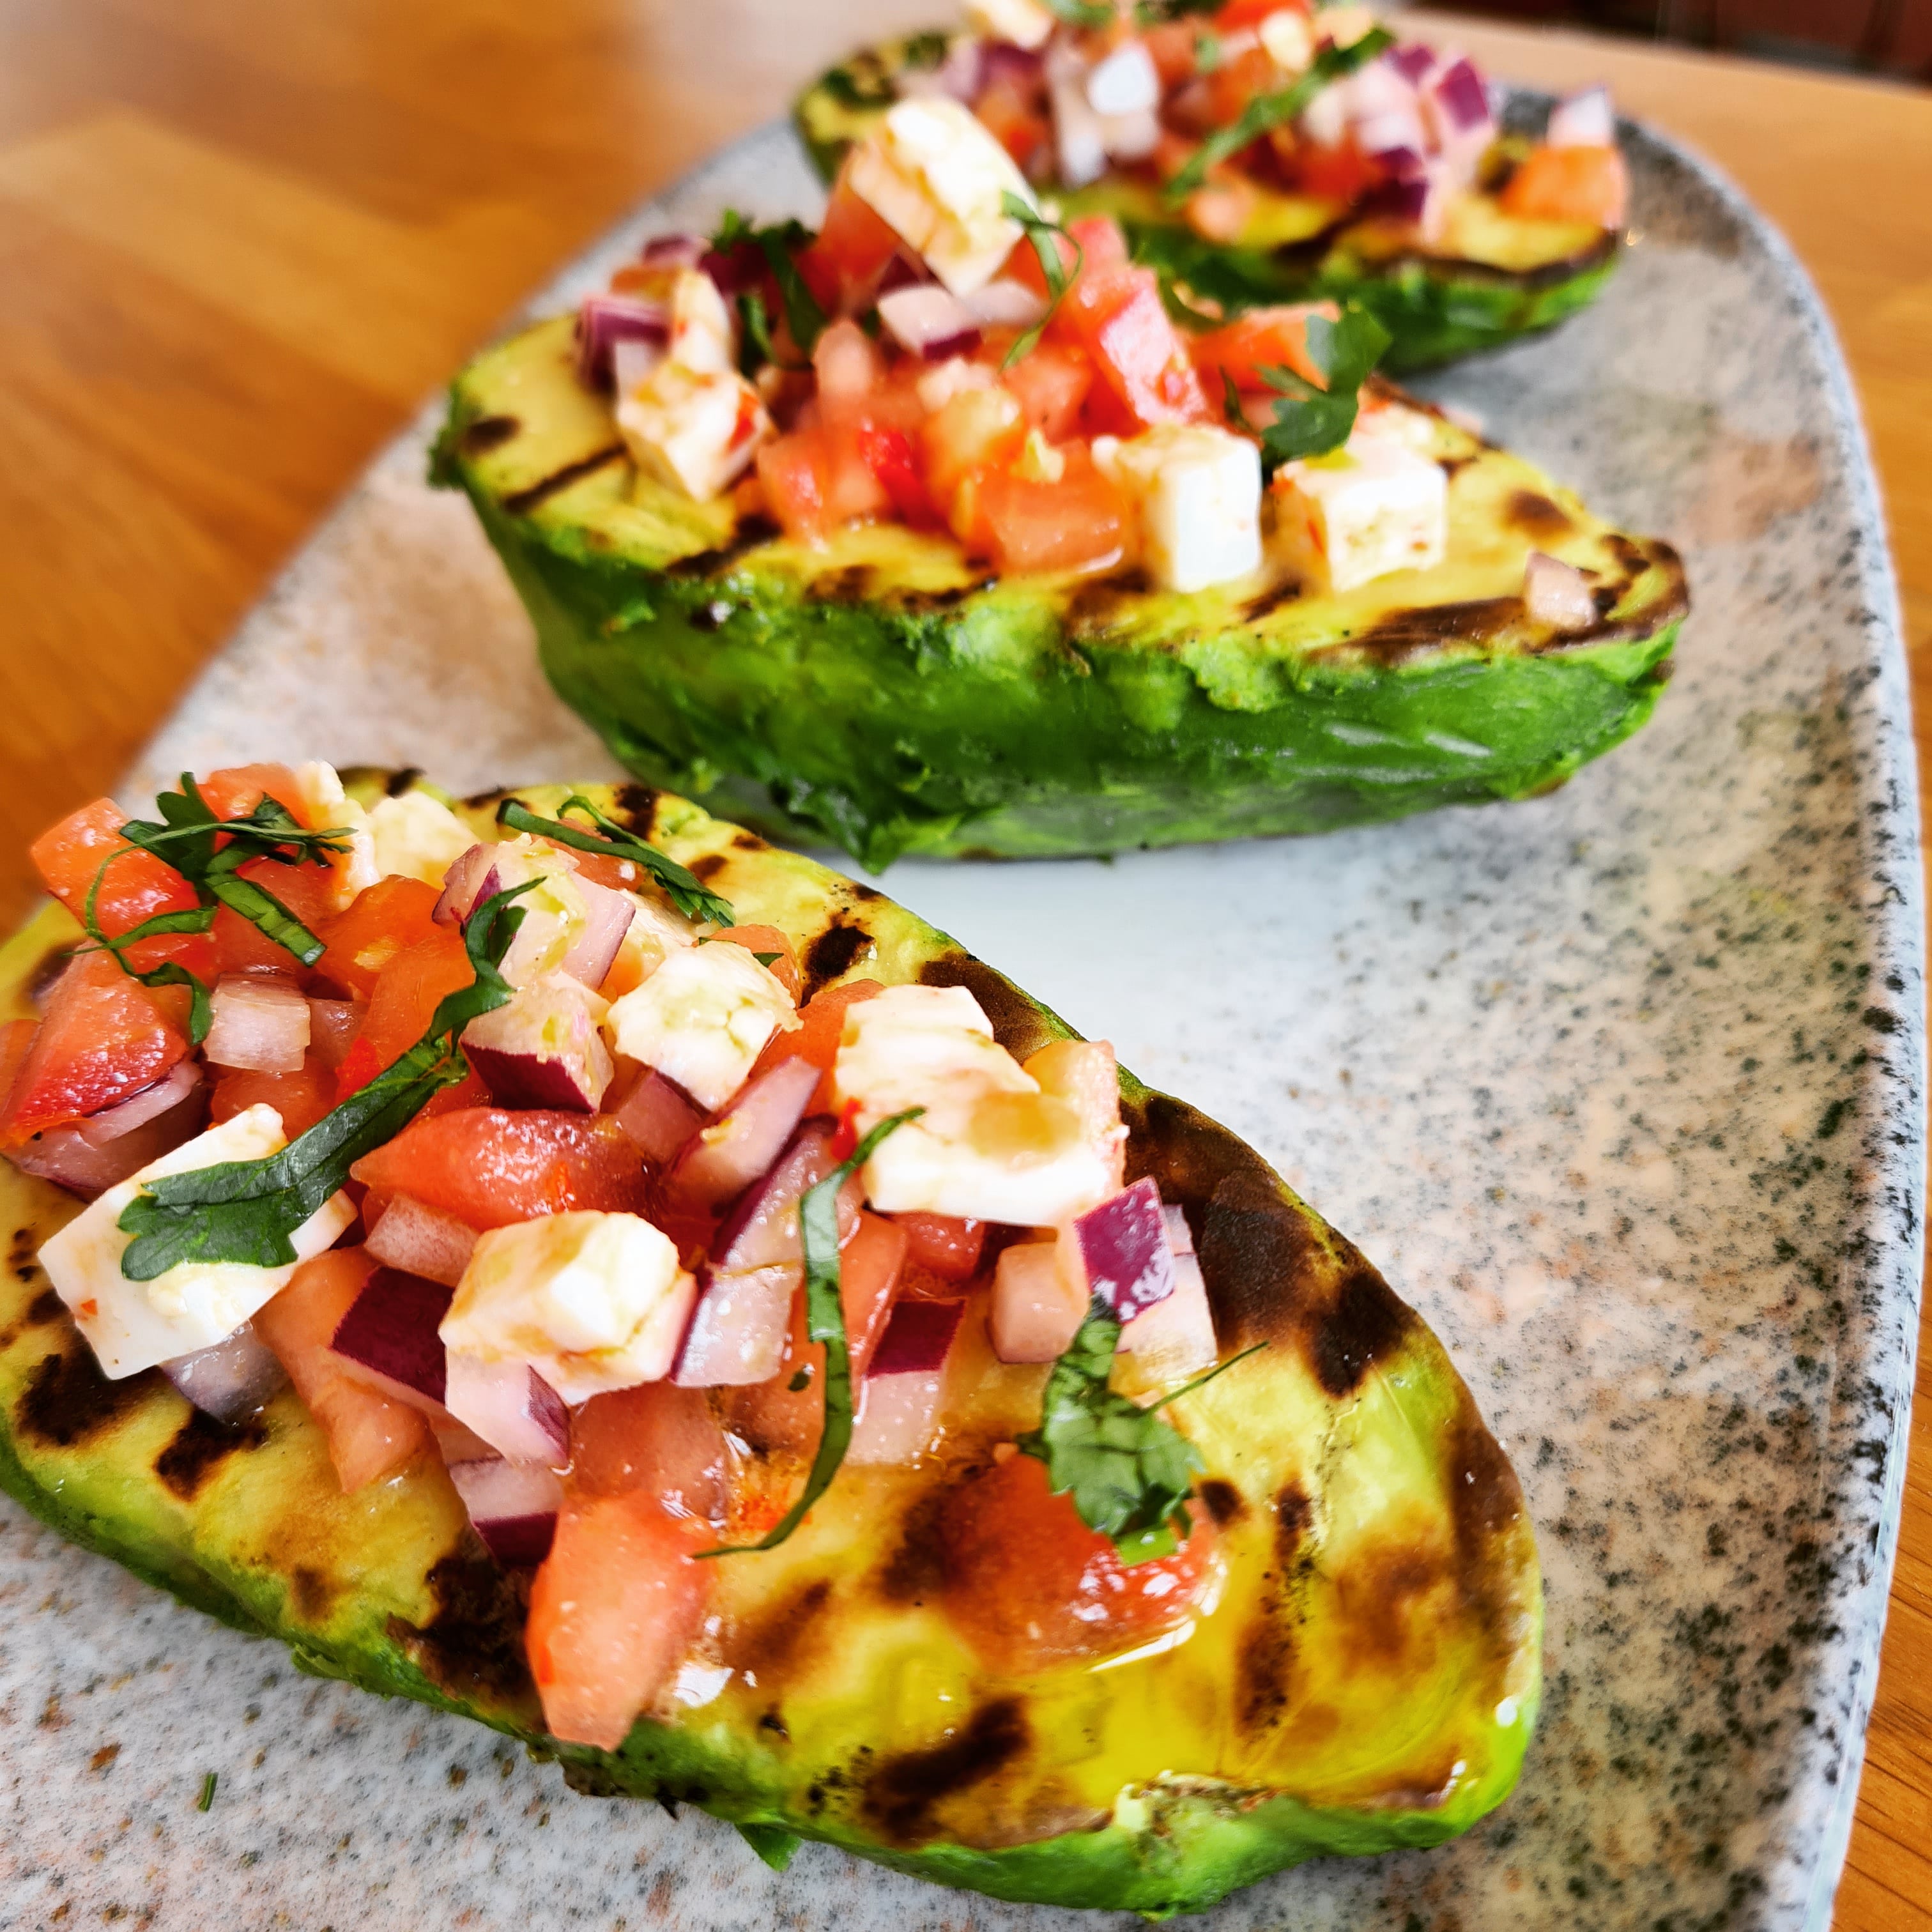 Grilled avocado with Payoyo cheese with chili pepper